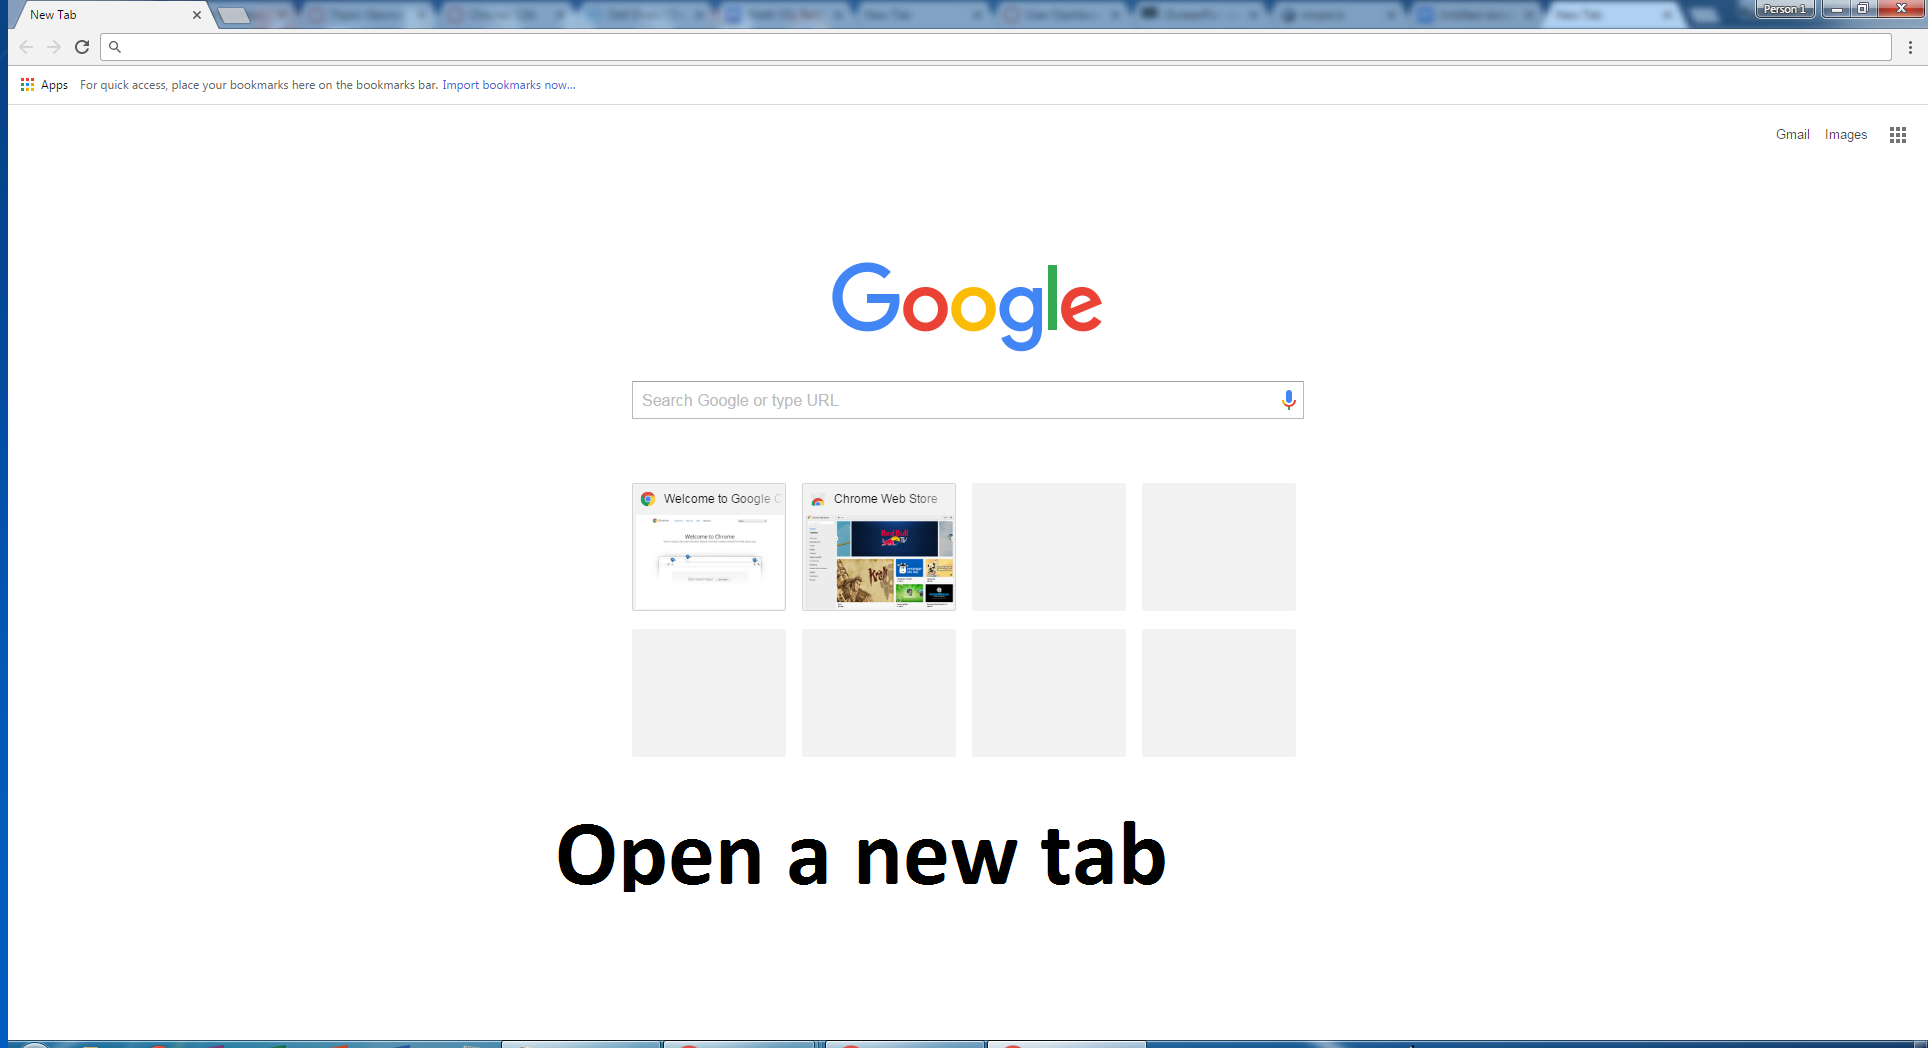 Open a new tab